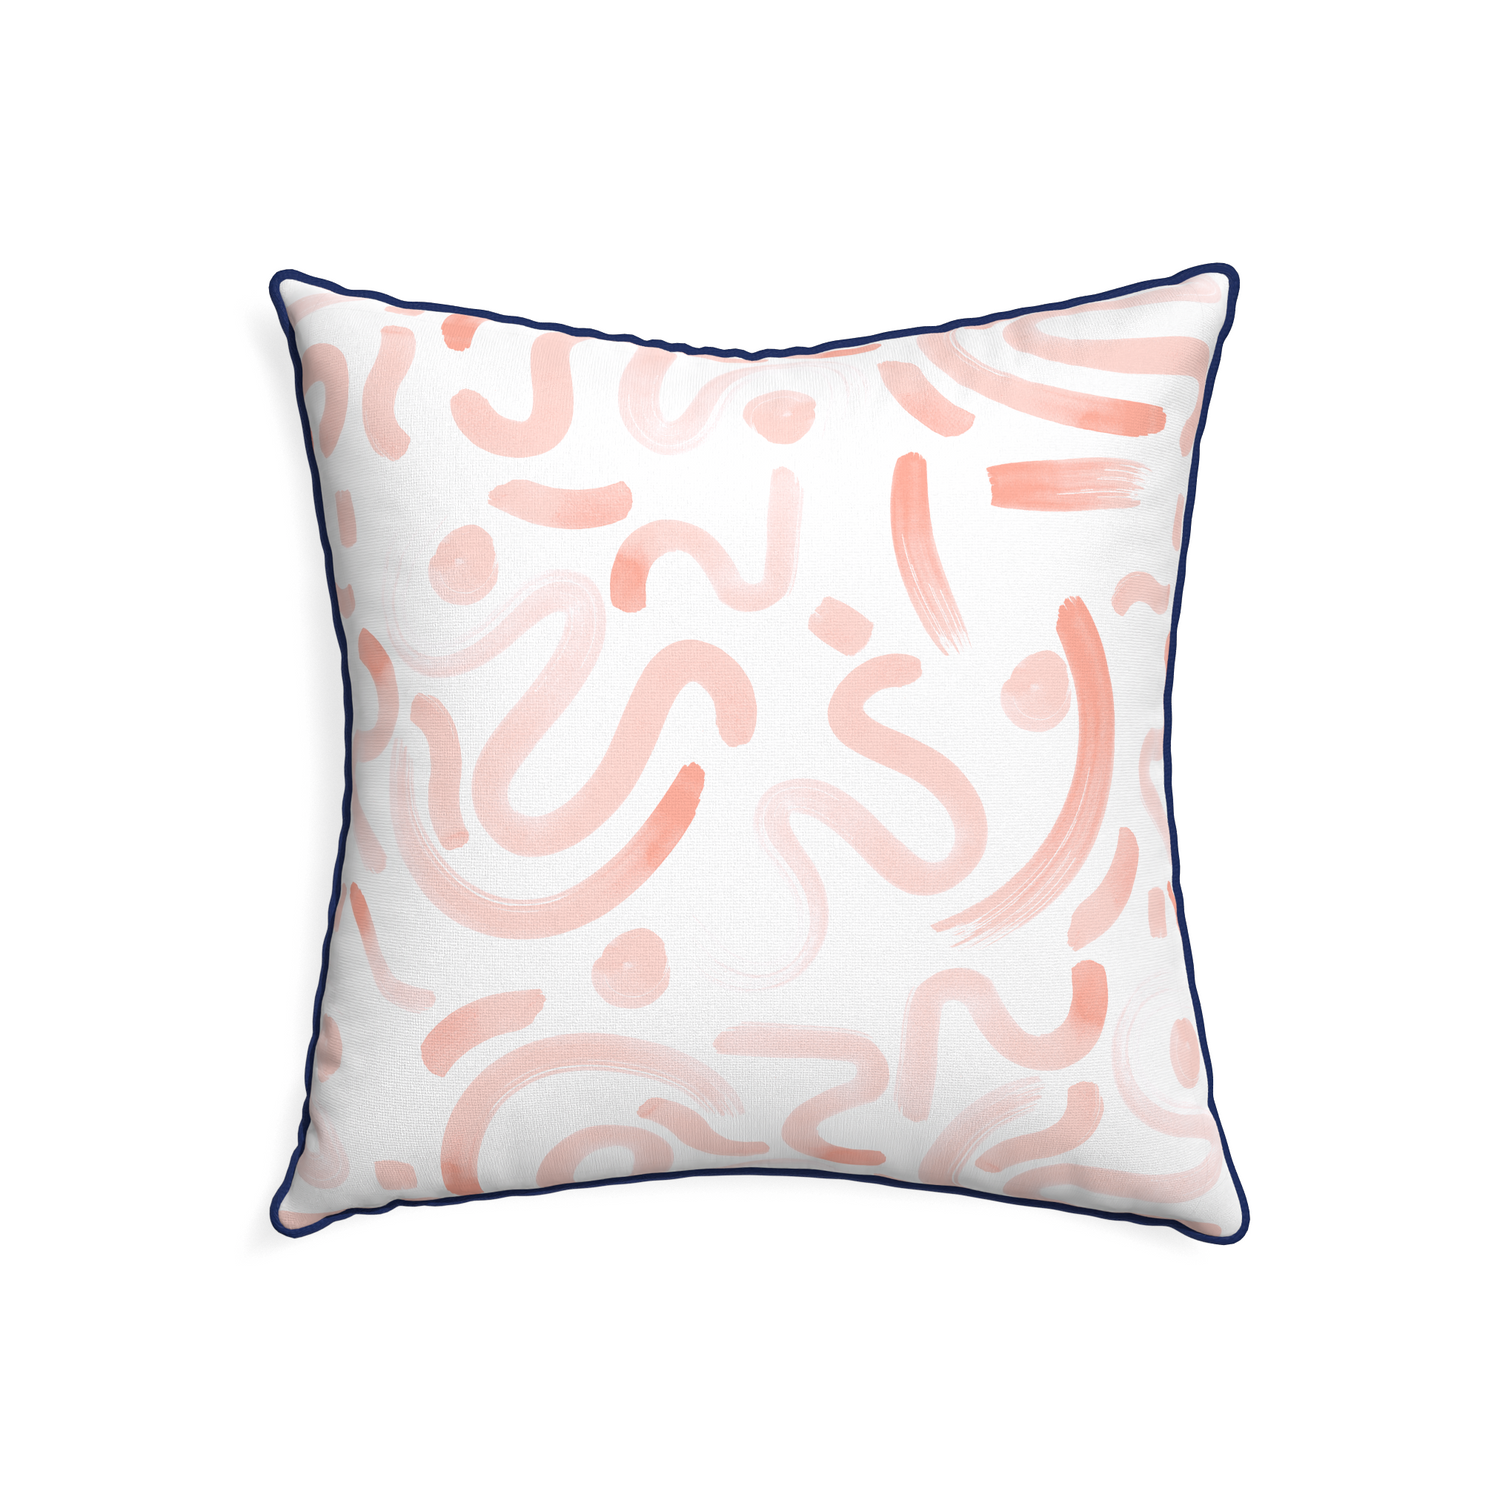 22-square hockney pink custom pillow with midnight piping on white background